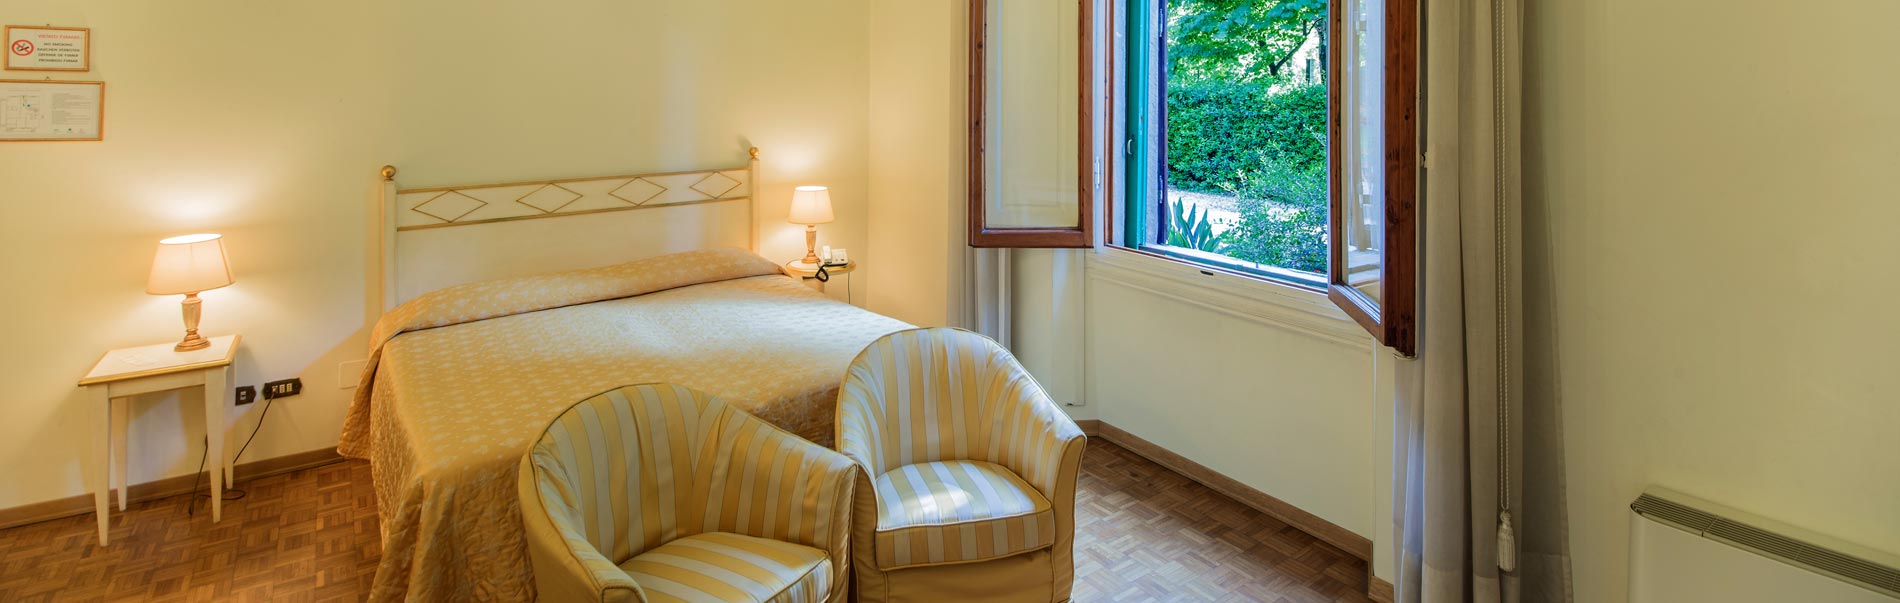 Residence Michelangiolo, luxury quiet rooms with cooking facilities and parking in Florence